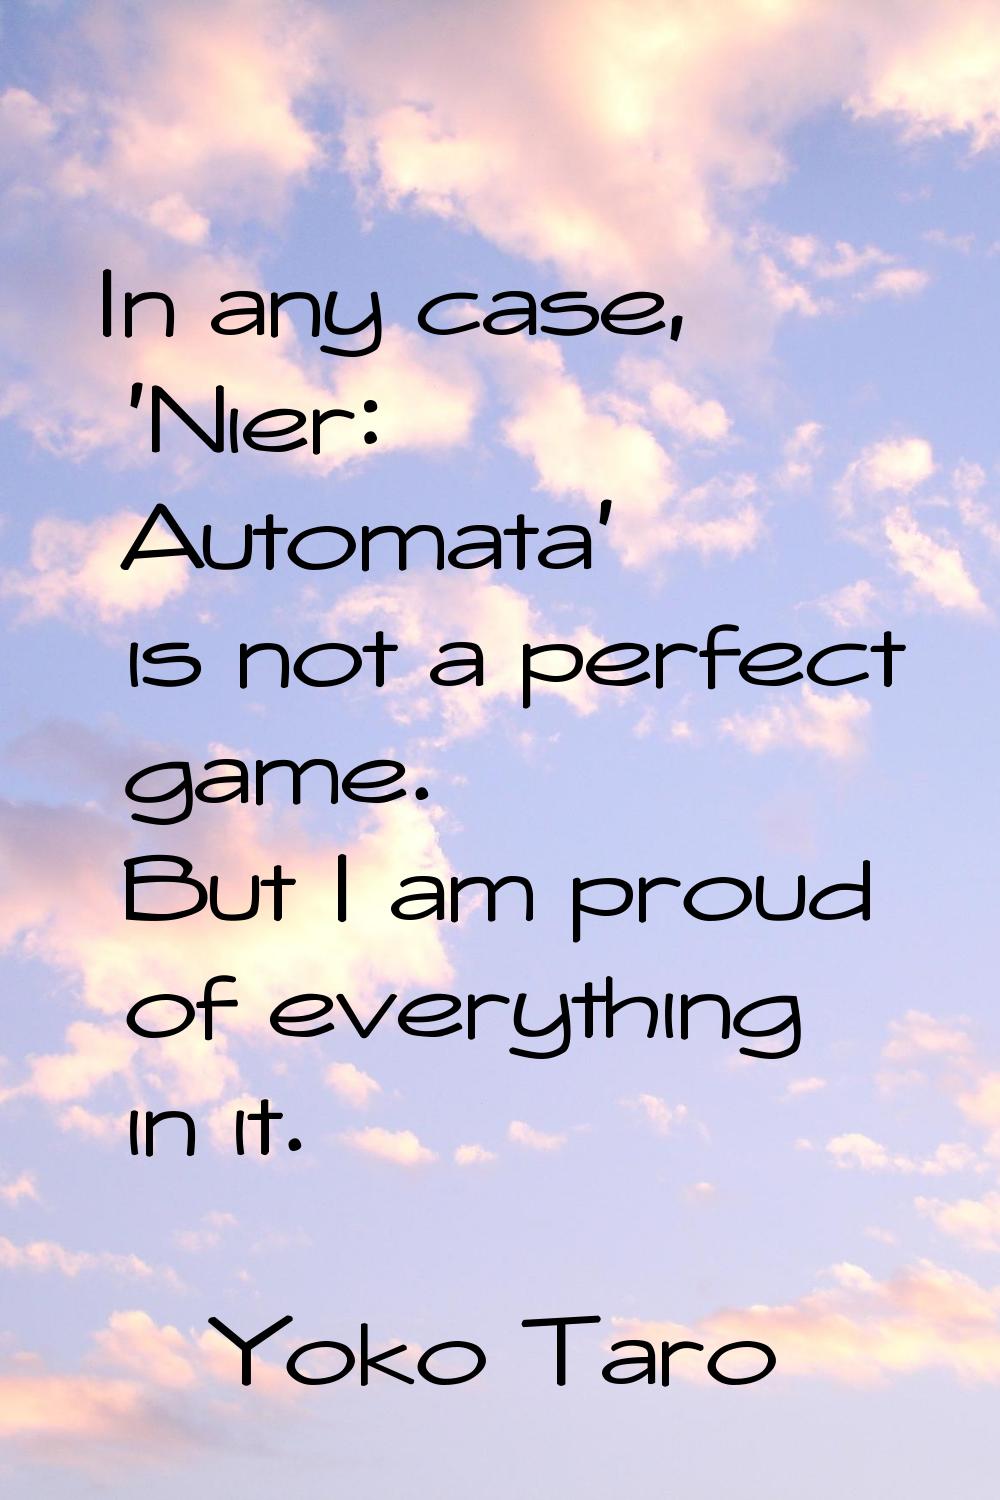 In any case, 'Nier: Automata' is not a perfect game. But I am proud of everything in it.